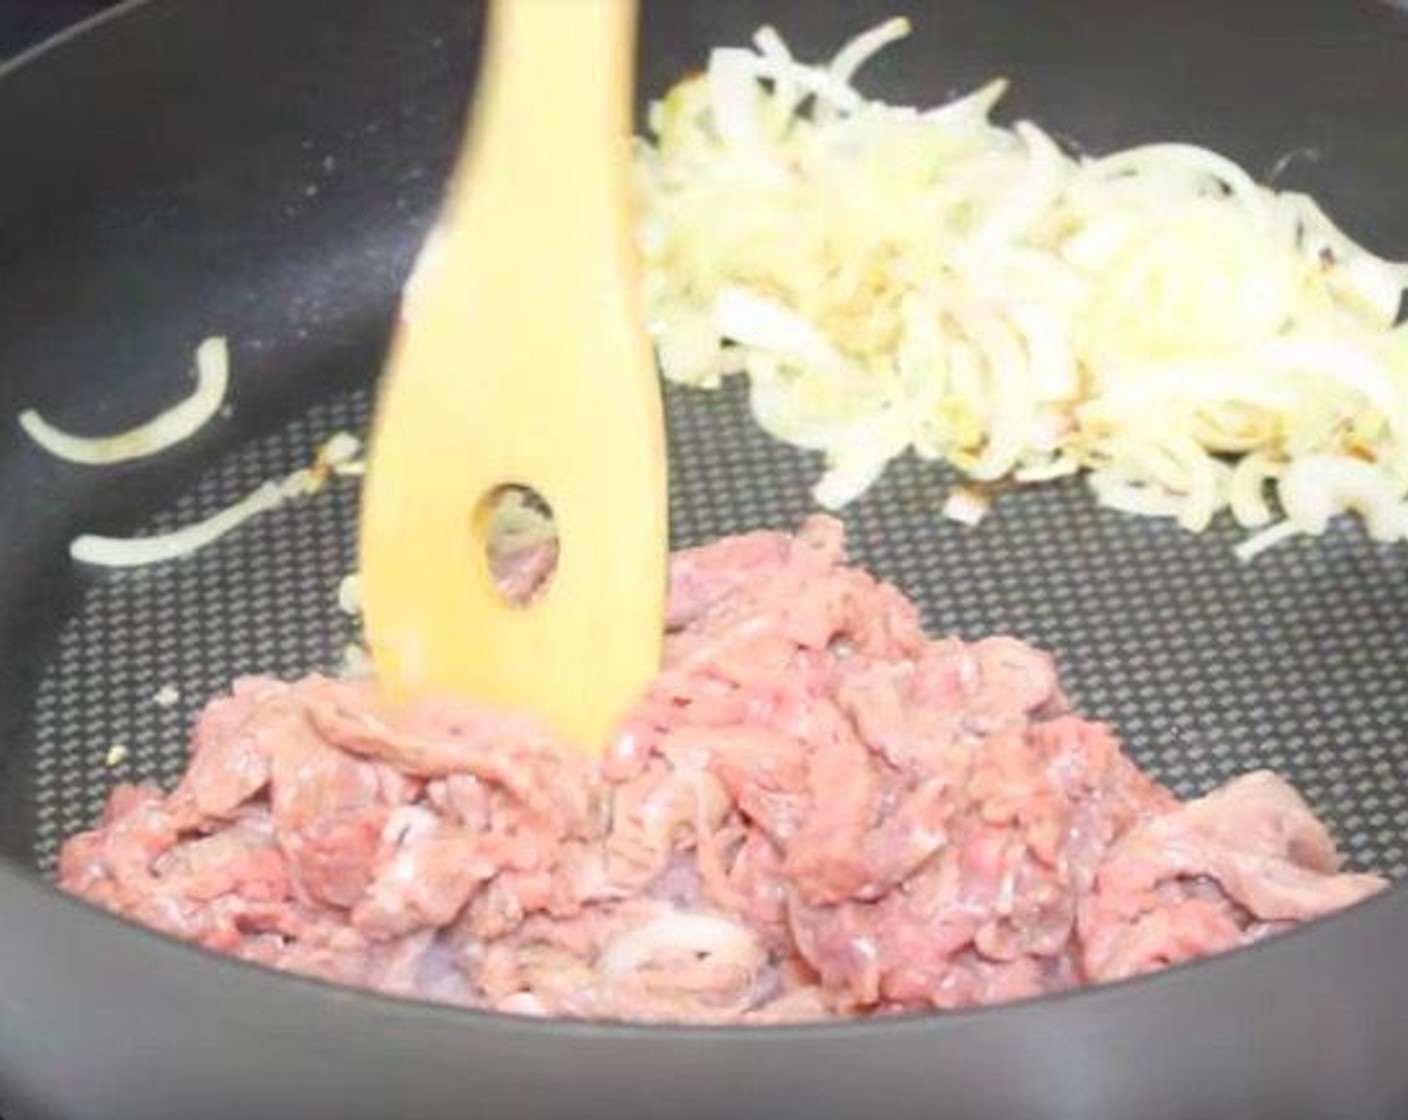 step 1 Over medium high heat, add Oil (2 Tbsp) to a pan and cook Onion (1) with some salt for 4 minutes. Set aside to the pan and add Sirloin Steak (1 lb). Add Garlic Powder (1 tsp), Salt (to taste), and Ground Black Pepper (to taste).